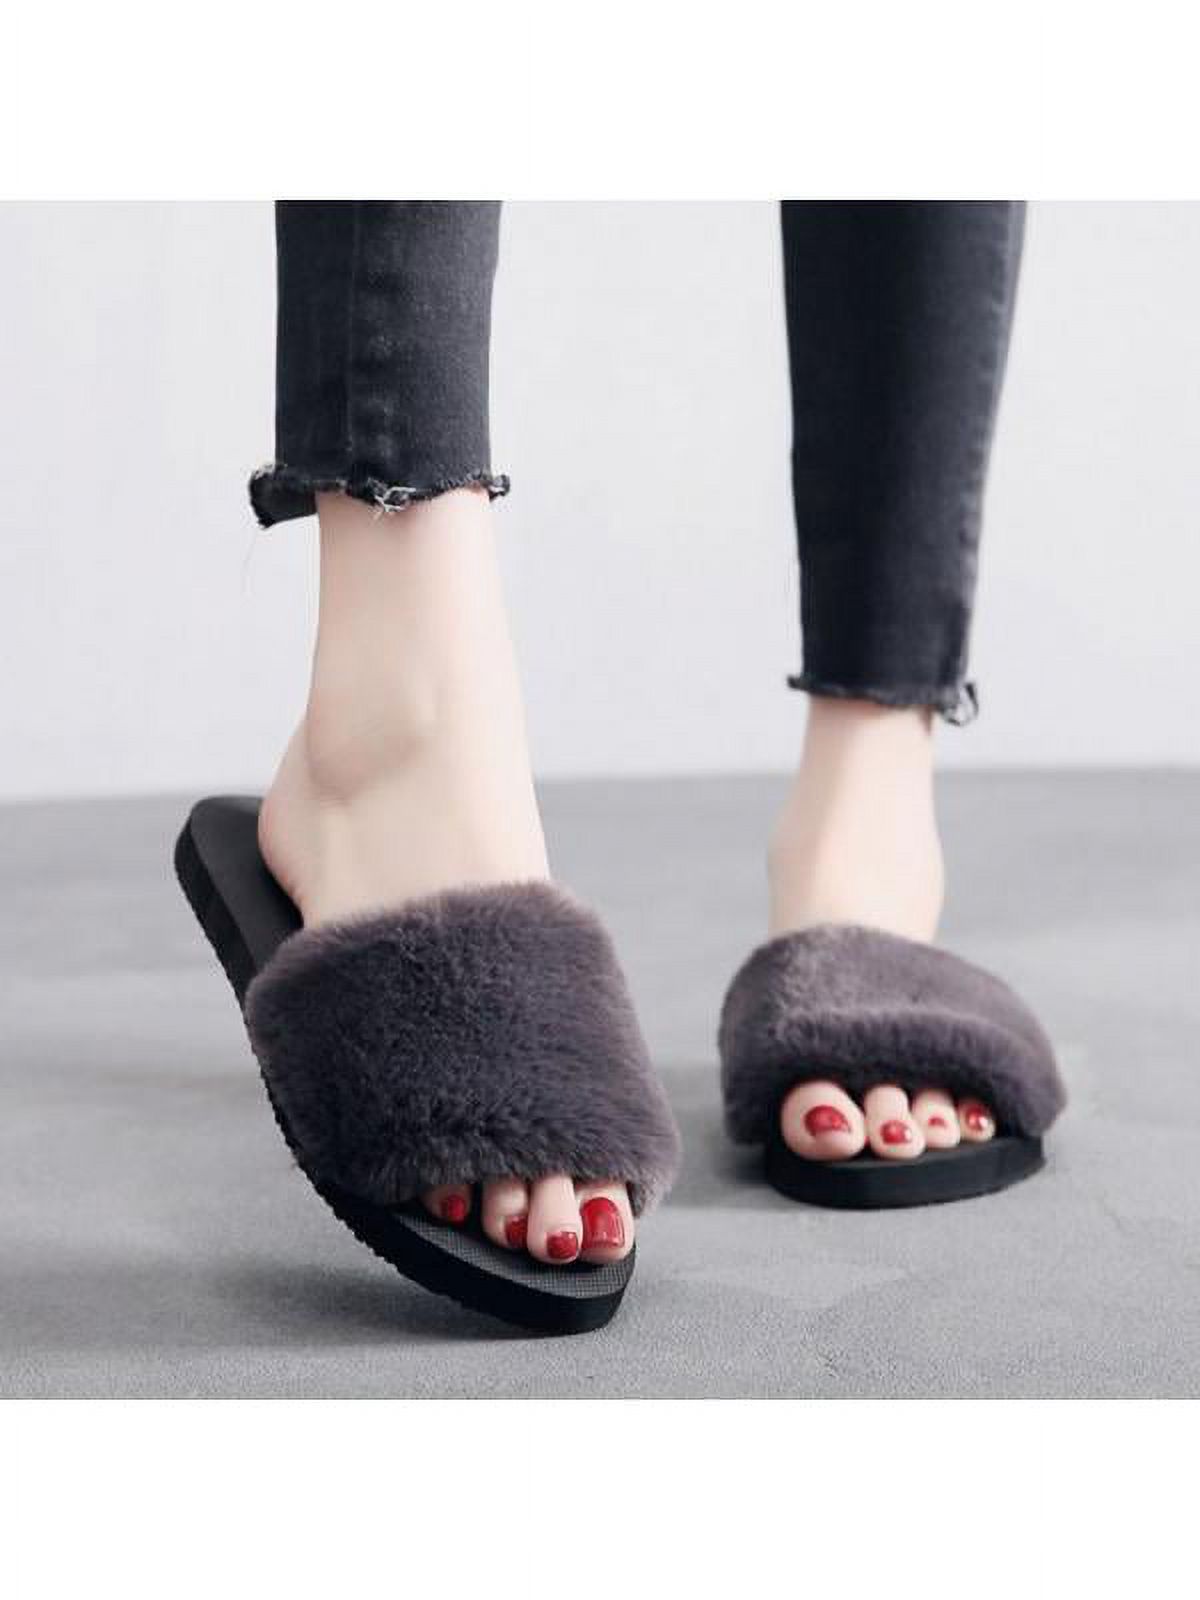 Ropalia Womens Winter Fur Solid Color Slippers Home Anti-Slip Warm Cotton Trailer Shoes Ladies Casual Shoes - image 2 of 3